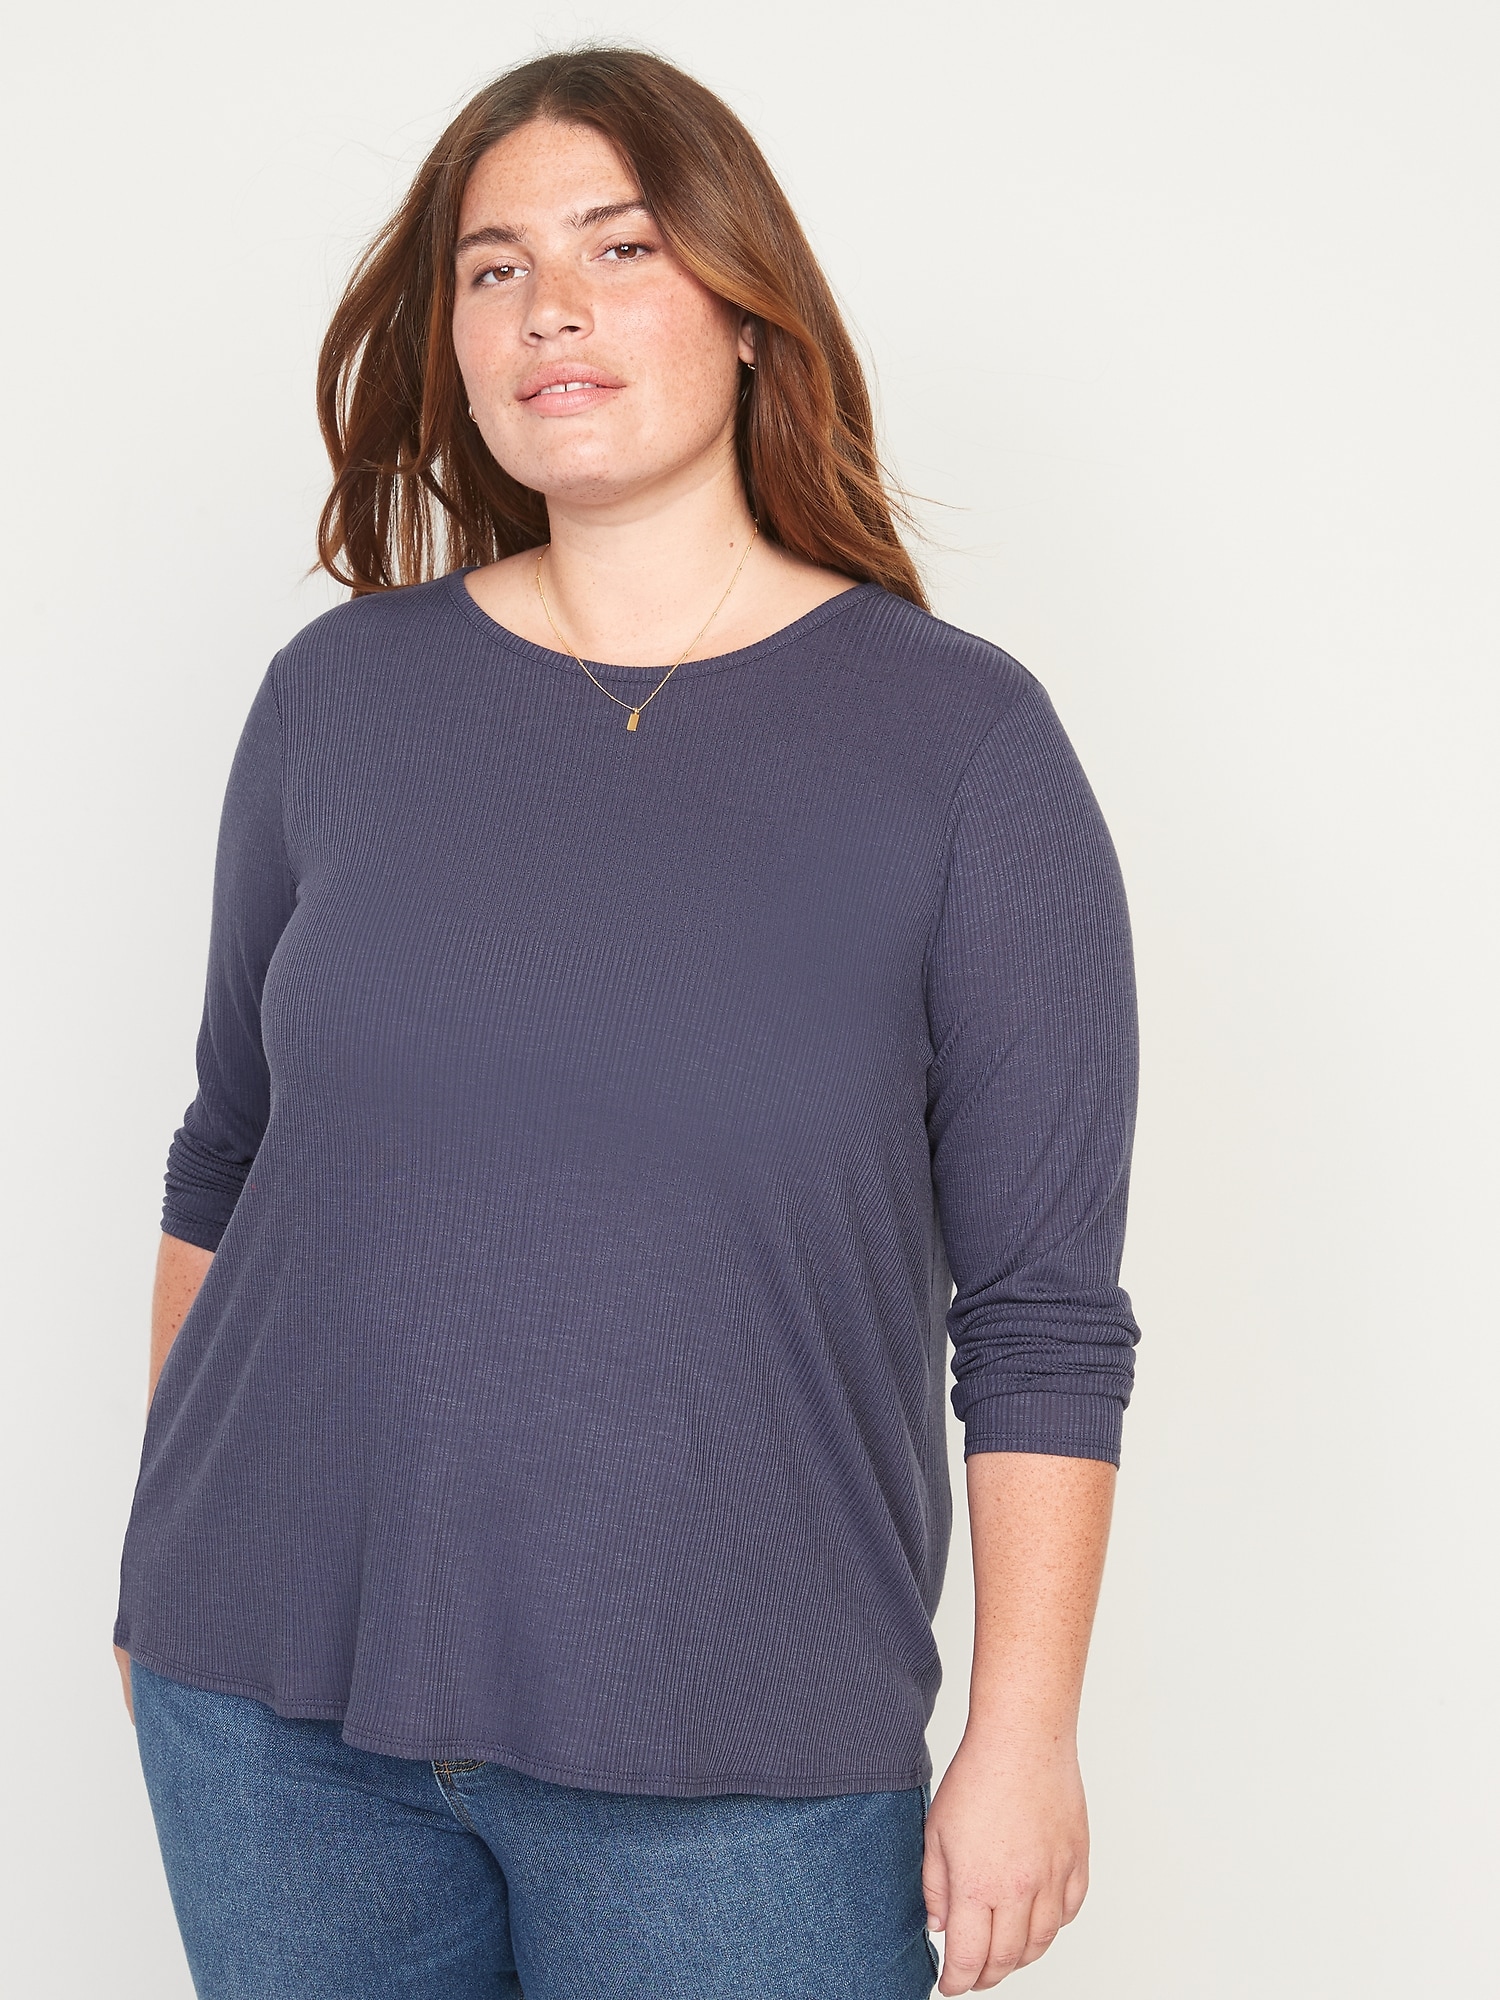 Long-Sleeve Luxe Heathered Rib-Knit T-Shirt | Old Navy